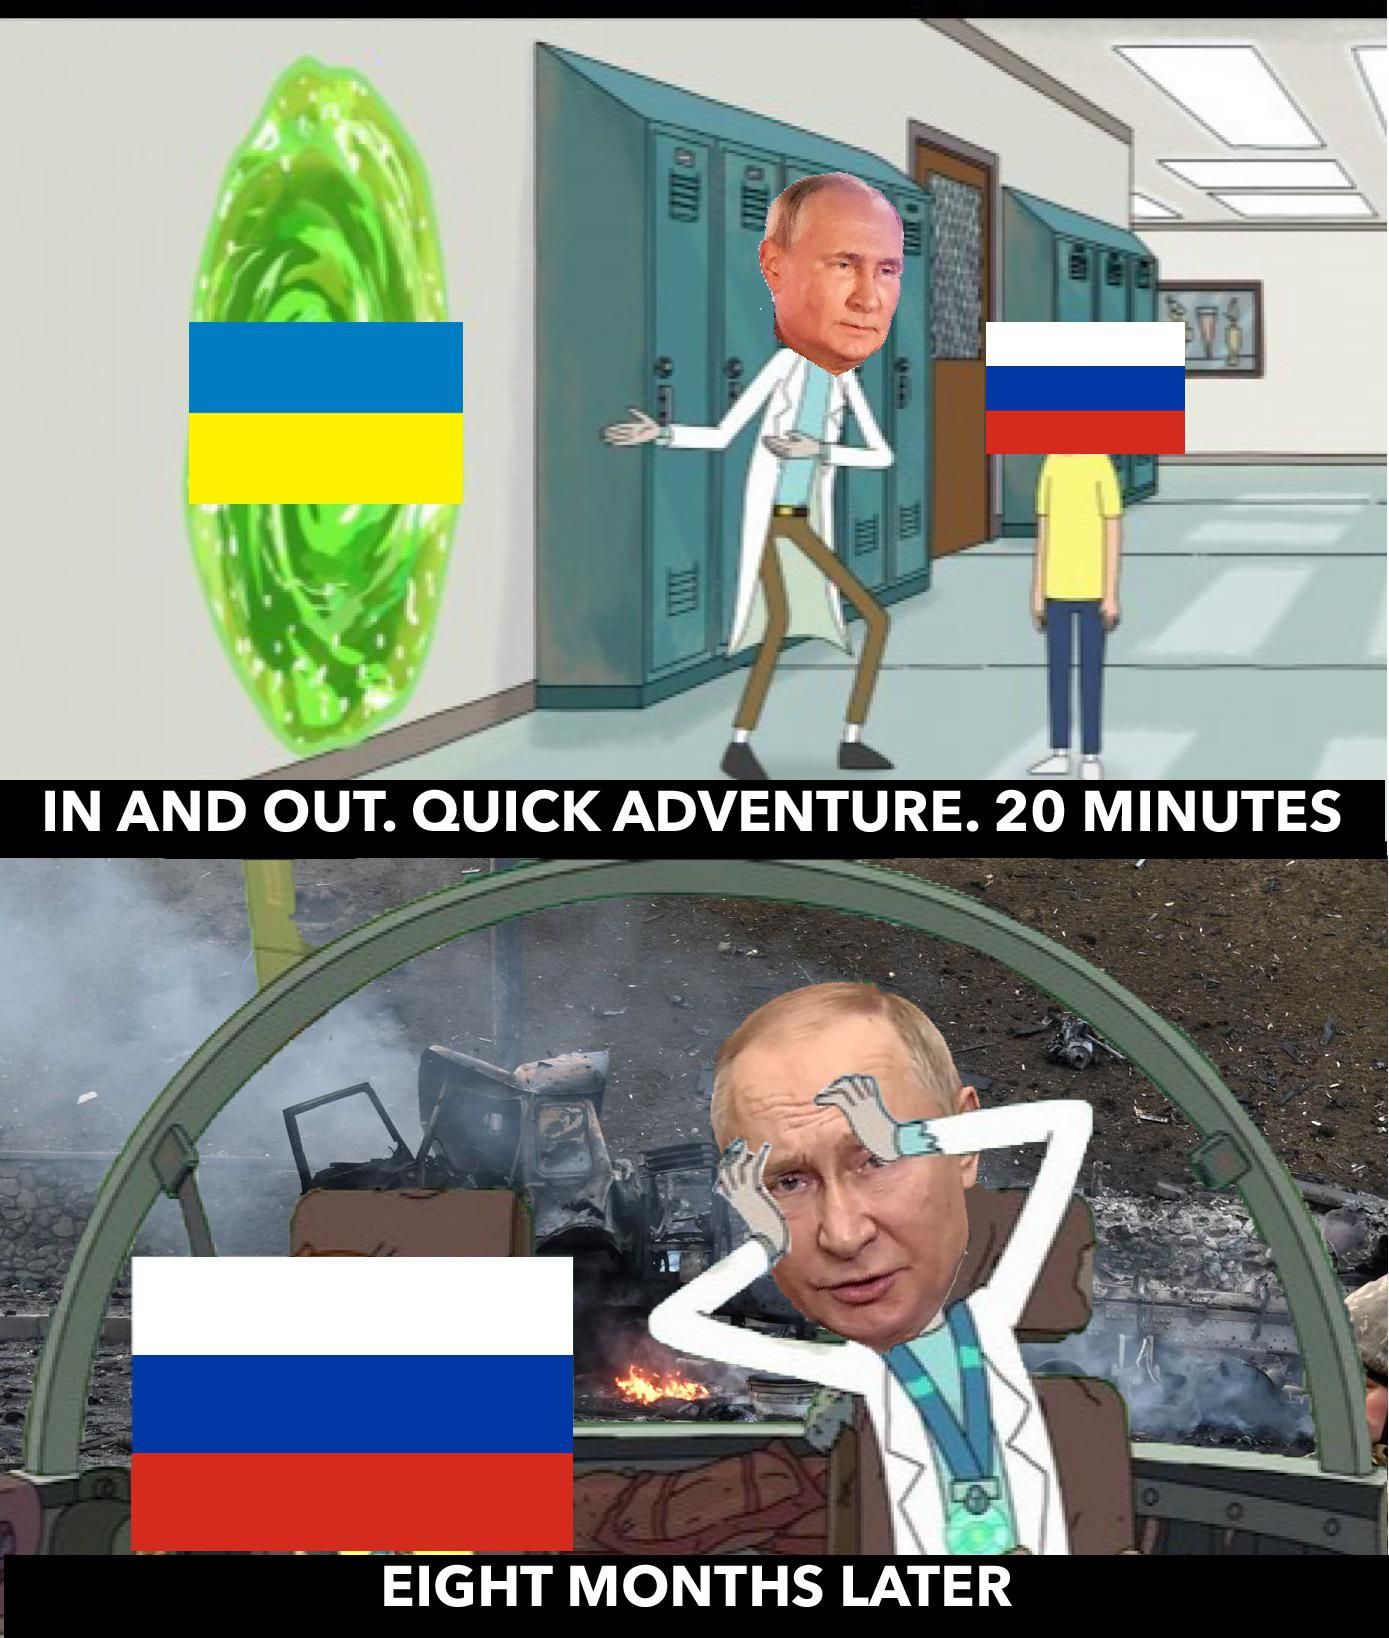 Another “brilliant” plan from that Russian guy